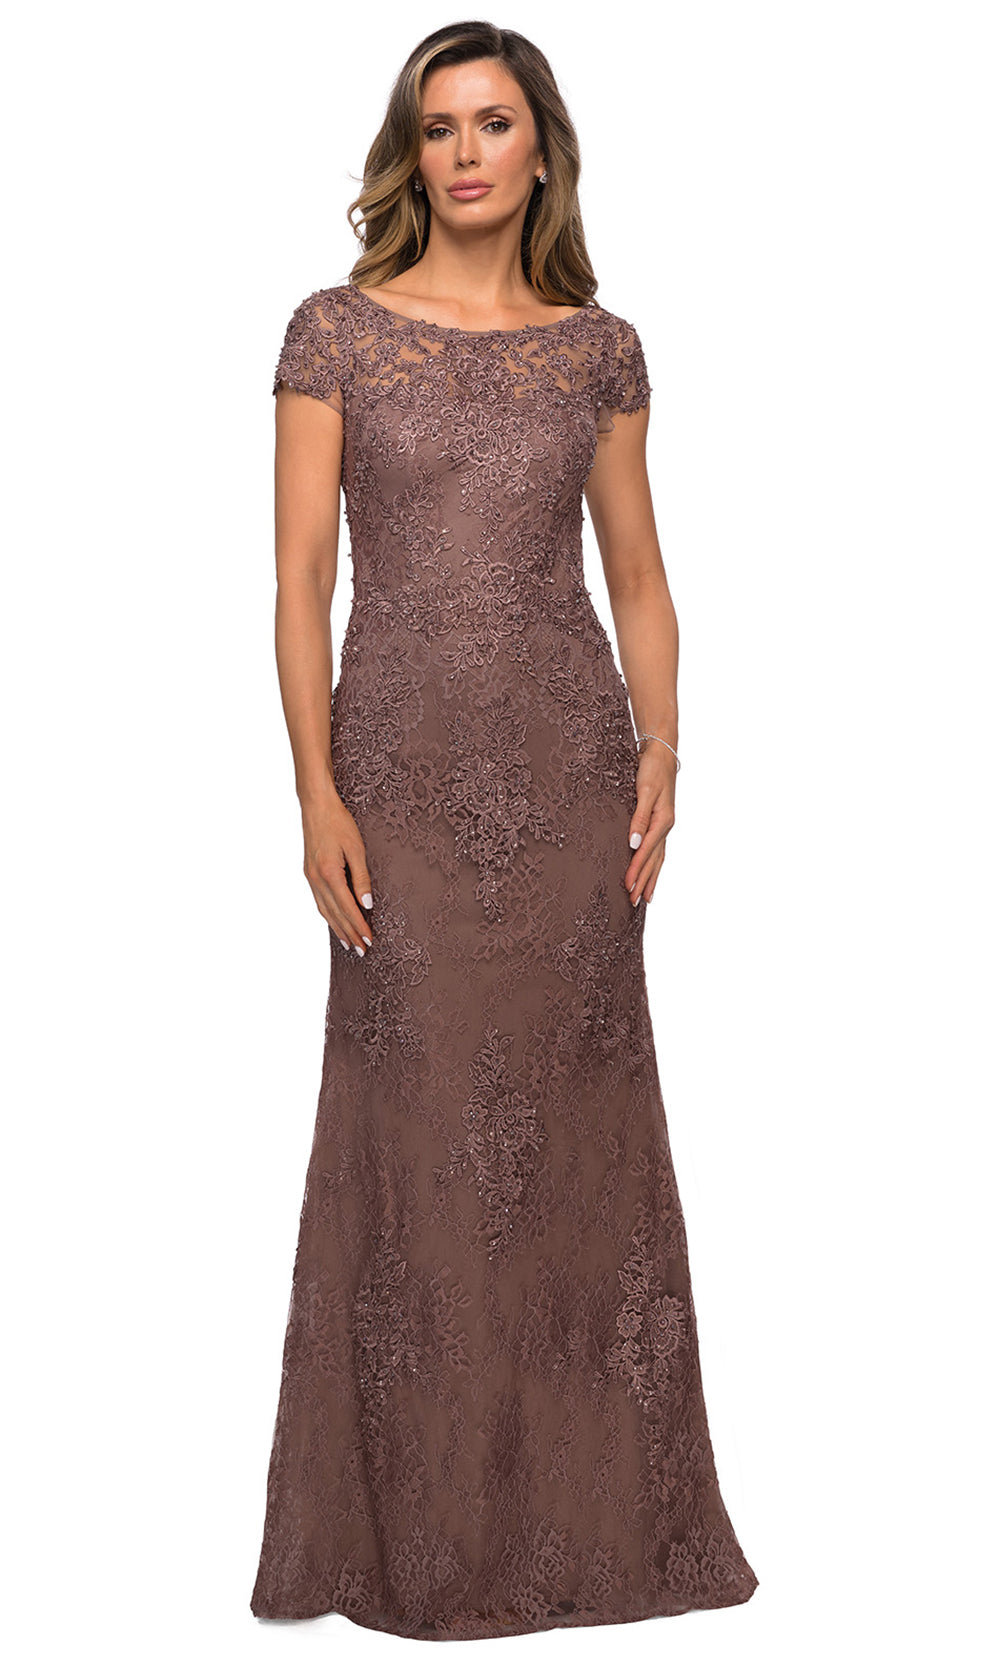 La Femme - 27856 Full Length Lace Fitted Dress In Brown